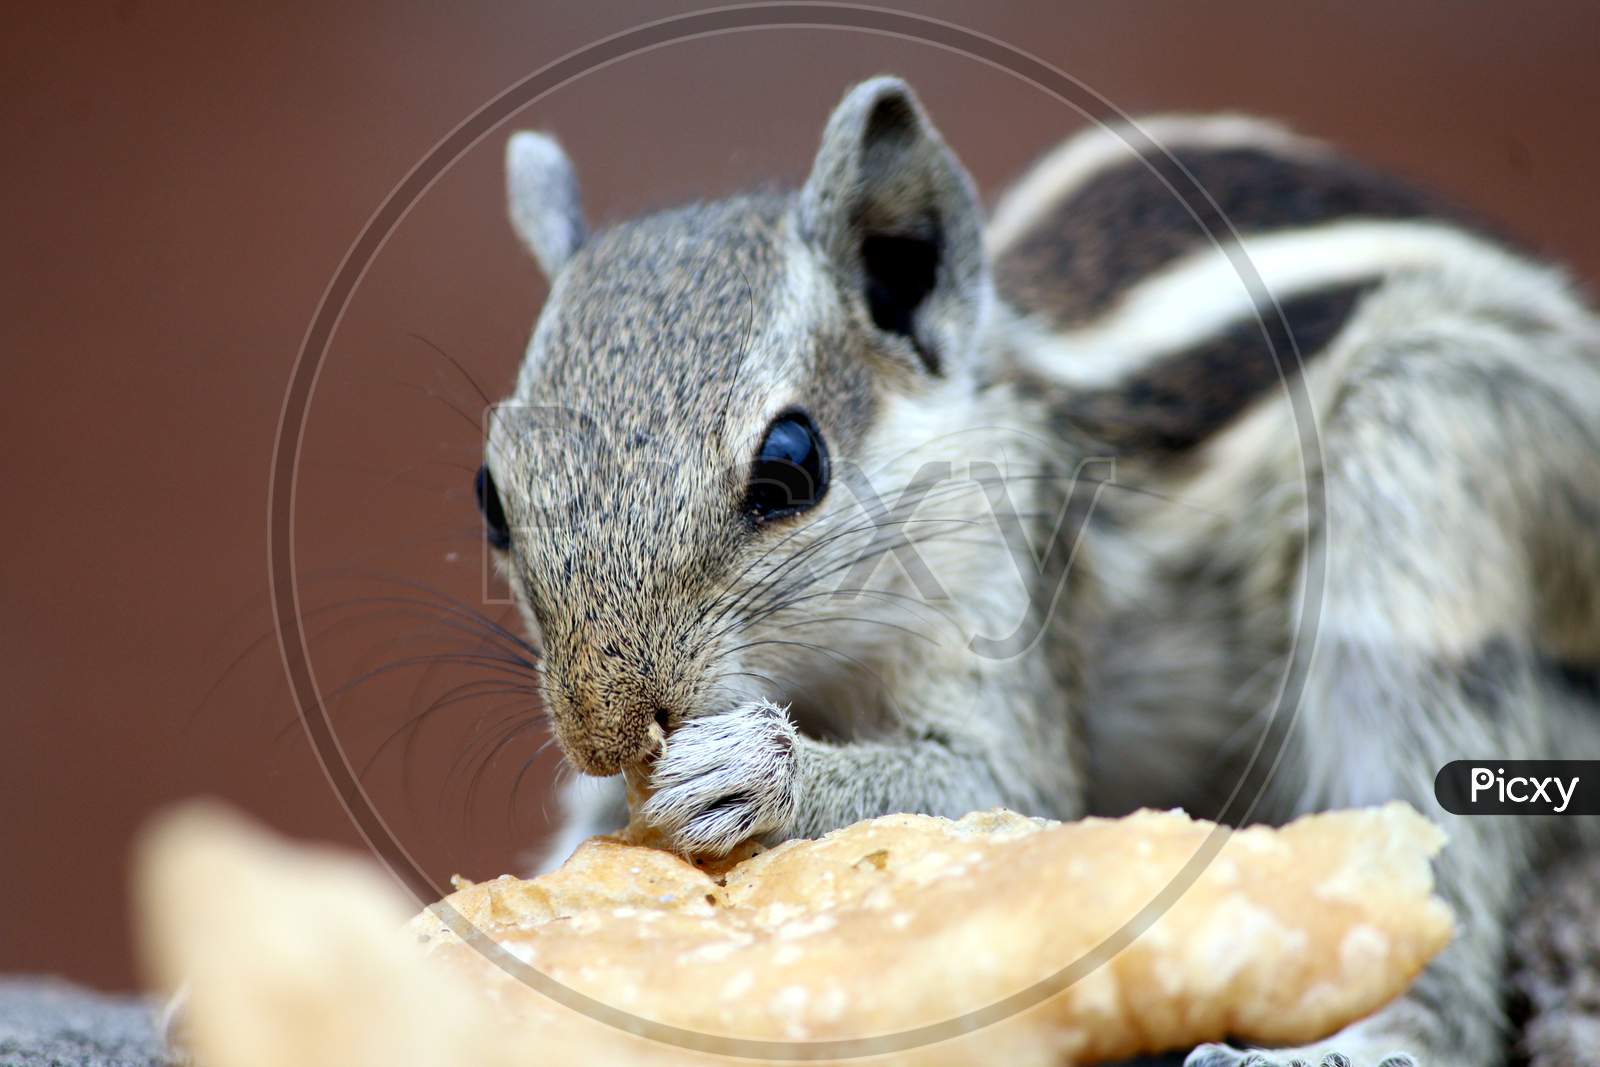 a squirrel eating food